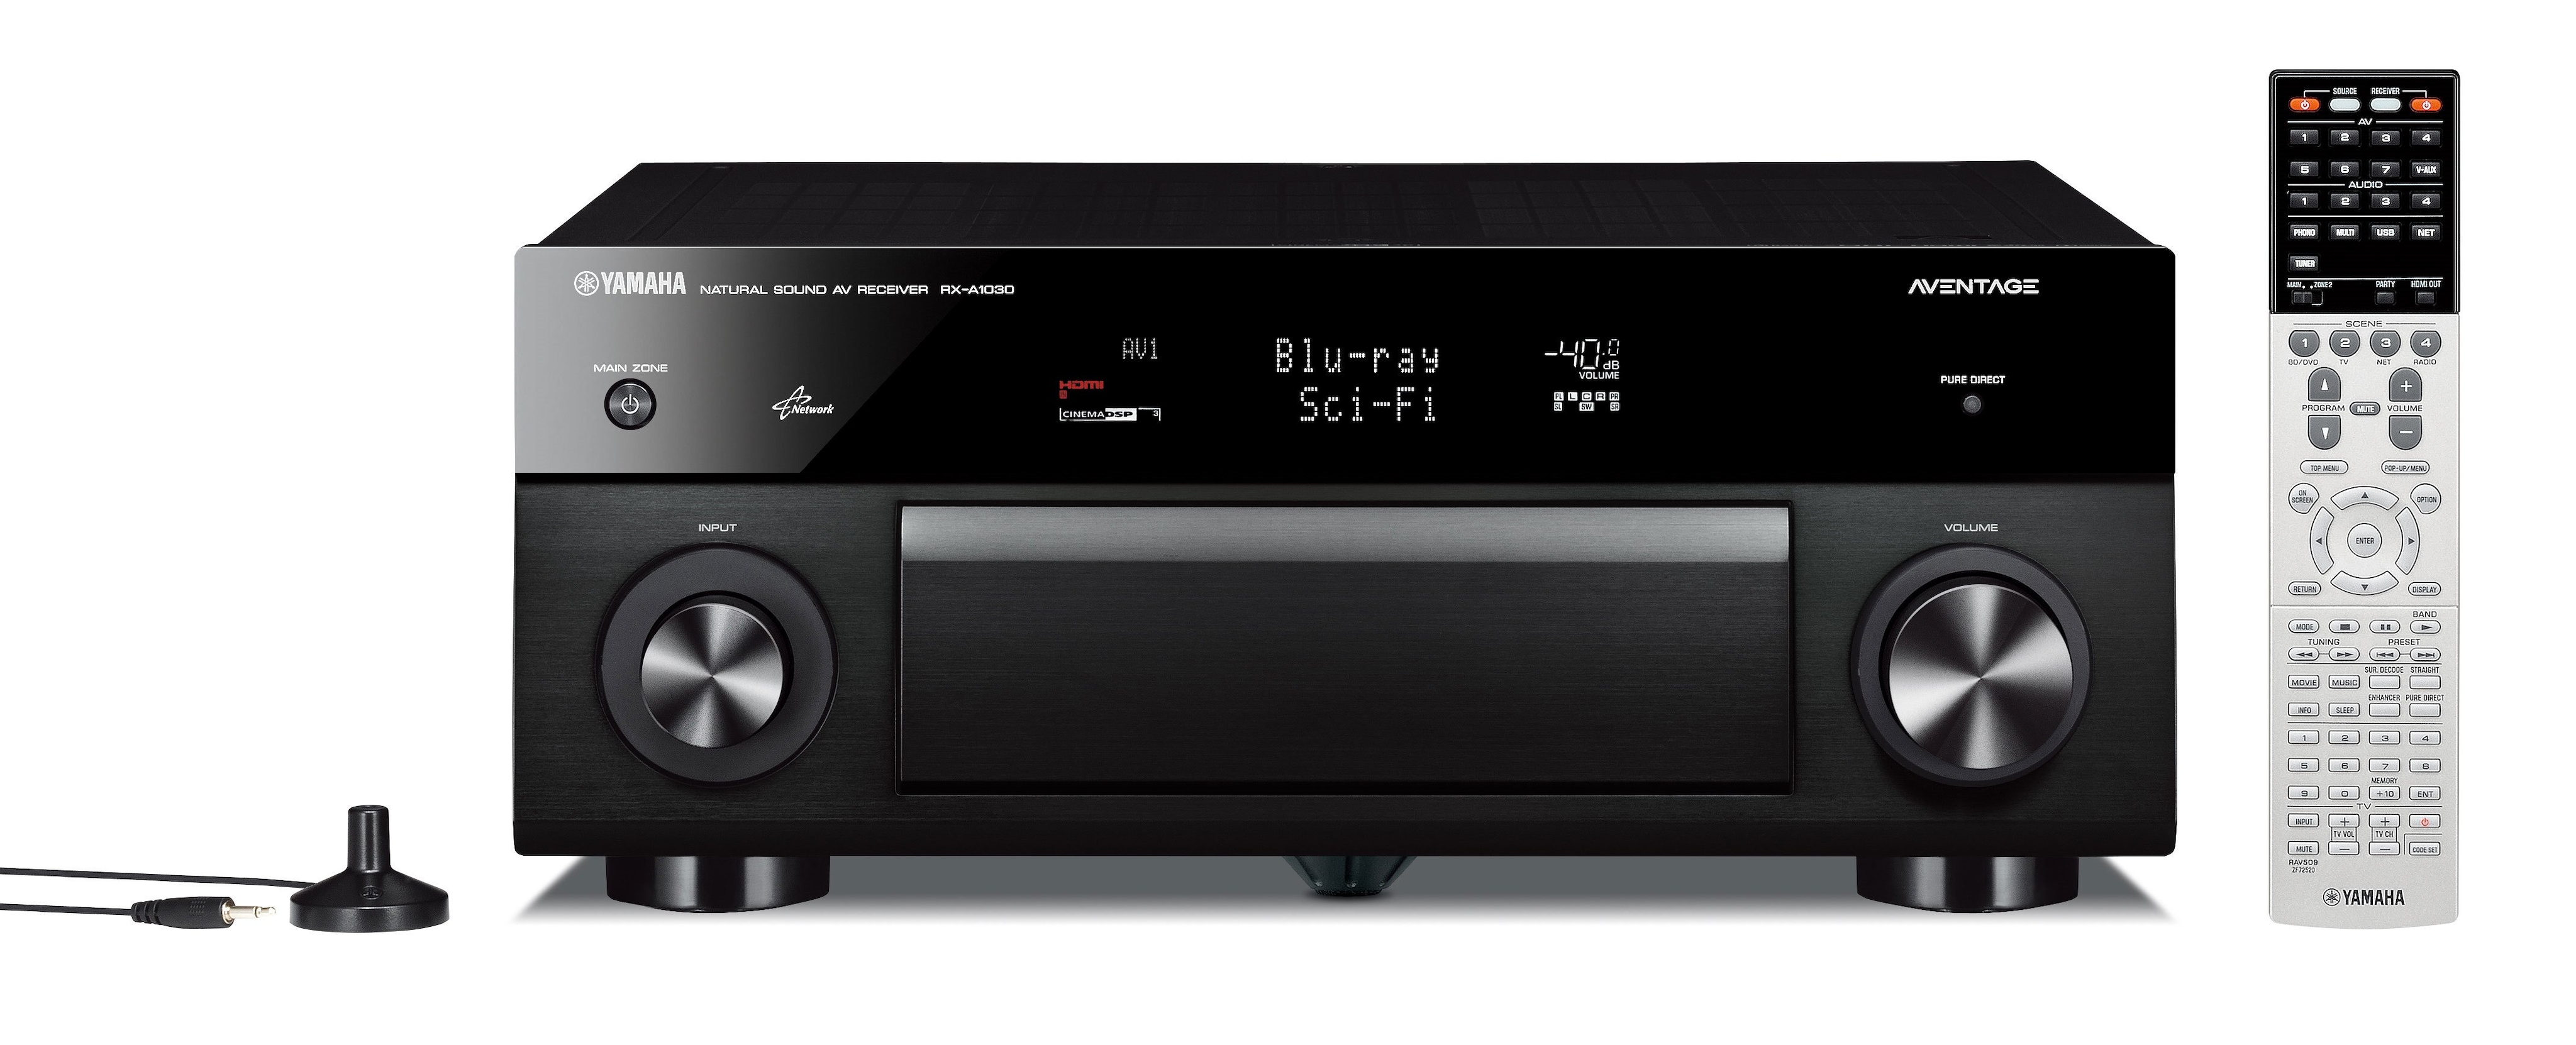 RX-A1030 - Overview - AV Receivers - Audio u0026 Visual - Products - Yamaha -  United States